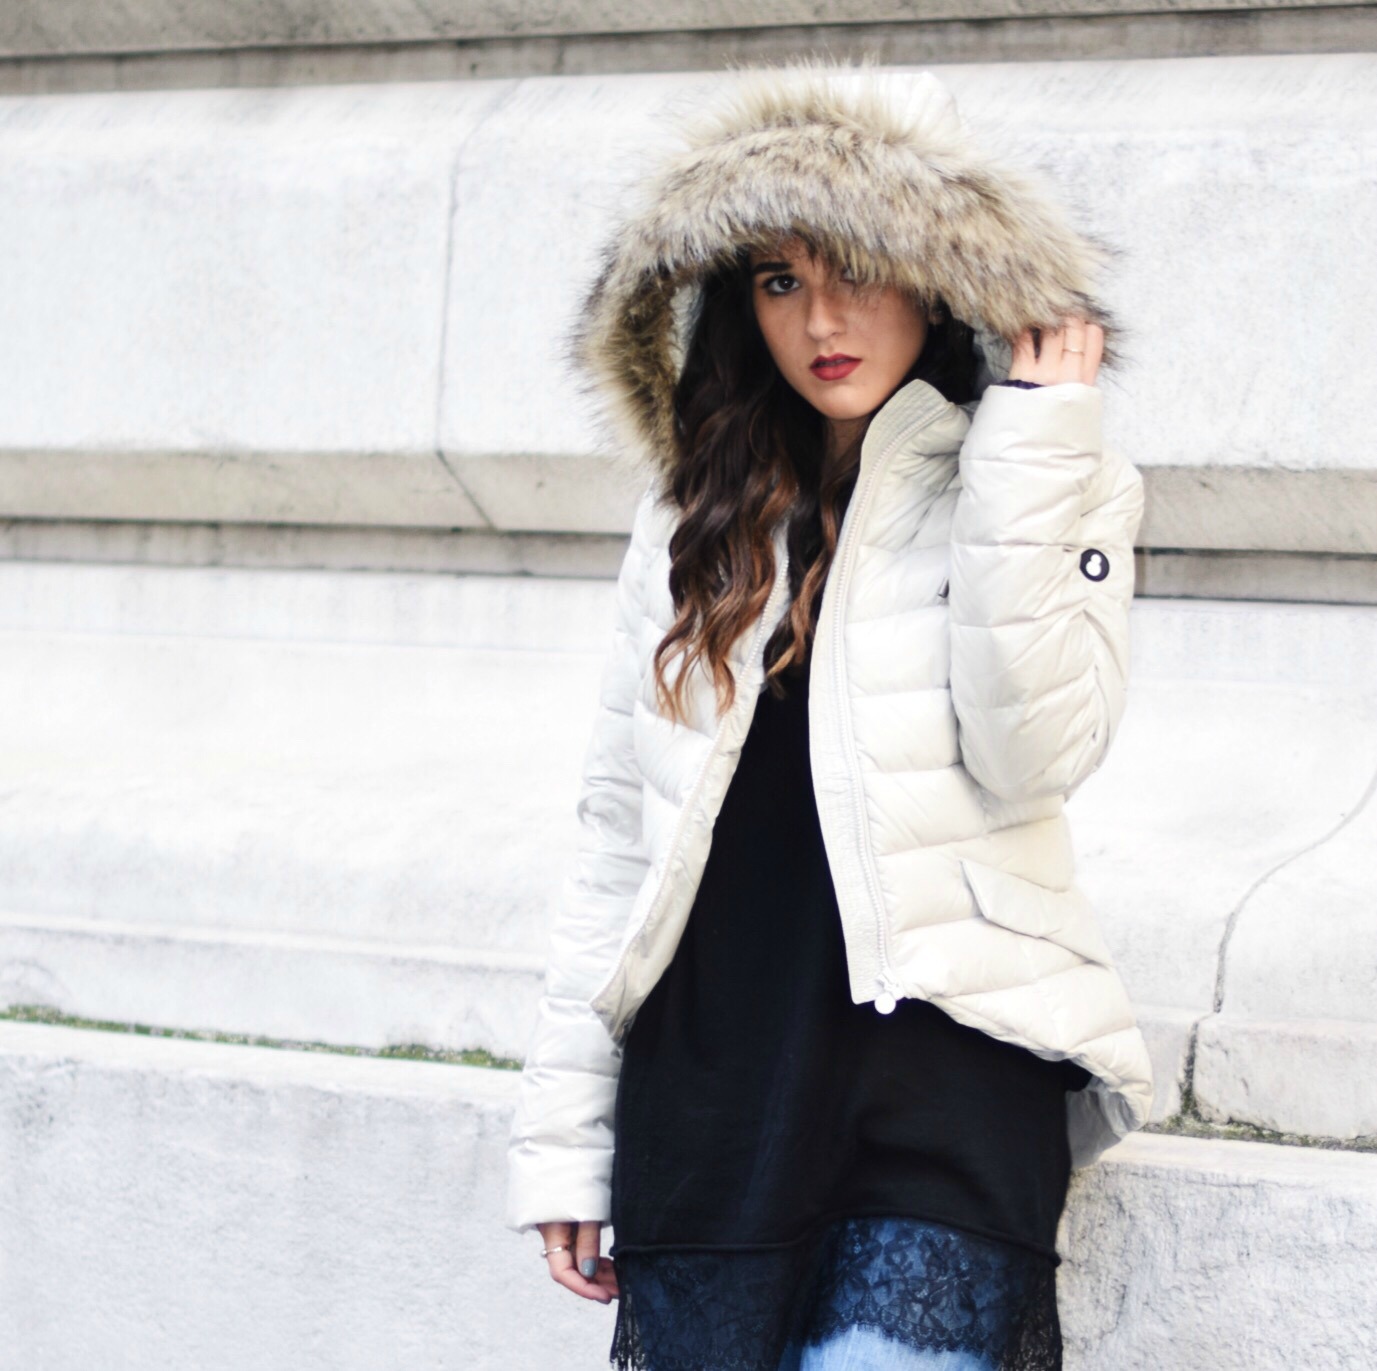 White Hi-Low Puffer Coat Snowman New York Louboutins & Love Fashion Blog Esther Santer NYC Street Style Blogger Puffer Premium Down Jacket Outerwear Company Collab Faux-Fur Hood White Winter Beautiful Rings Warm Photoshoot Model Discount Code Shopping.JPG